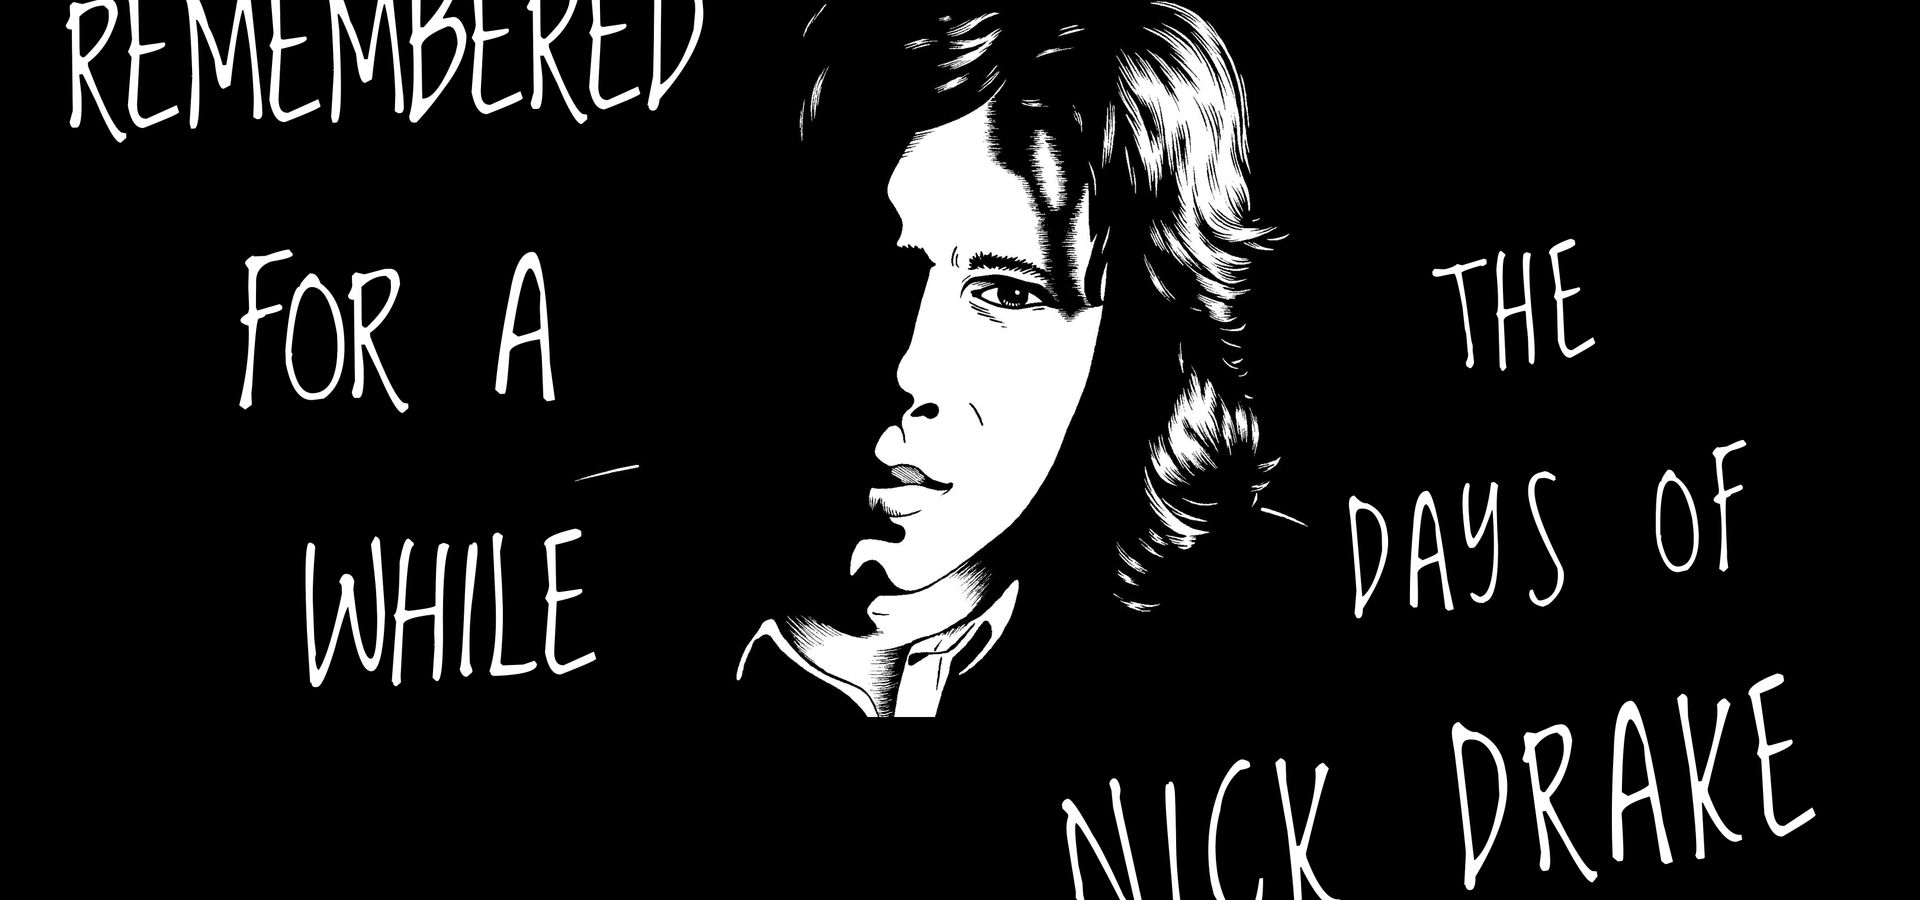 Naima Joris, Gianni Marzo, Nicolas Rombouts, Jan Swerts en Renée Sys - Remembered For a While: The Days of Nick Drake